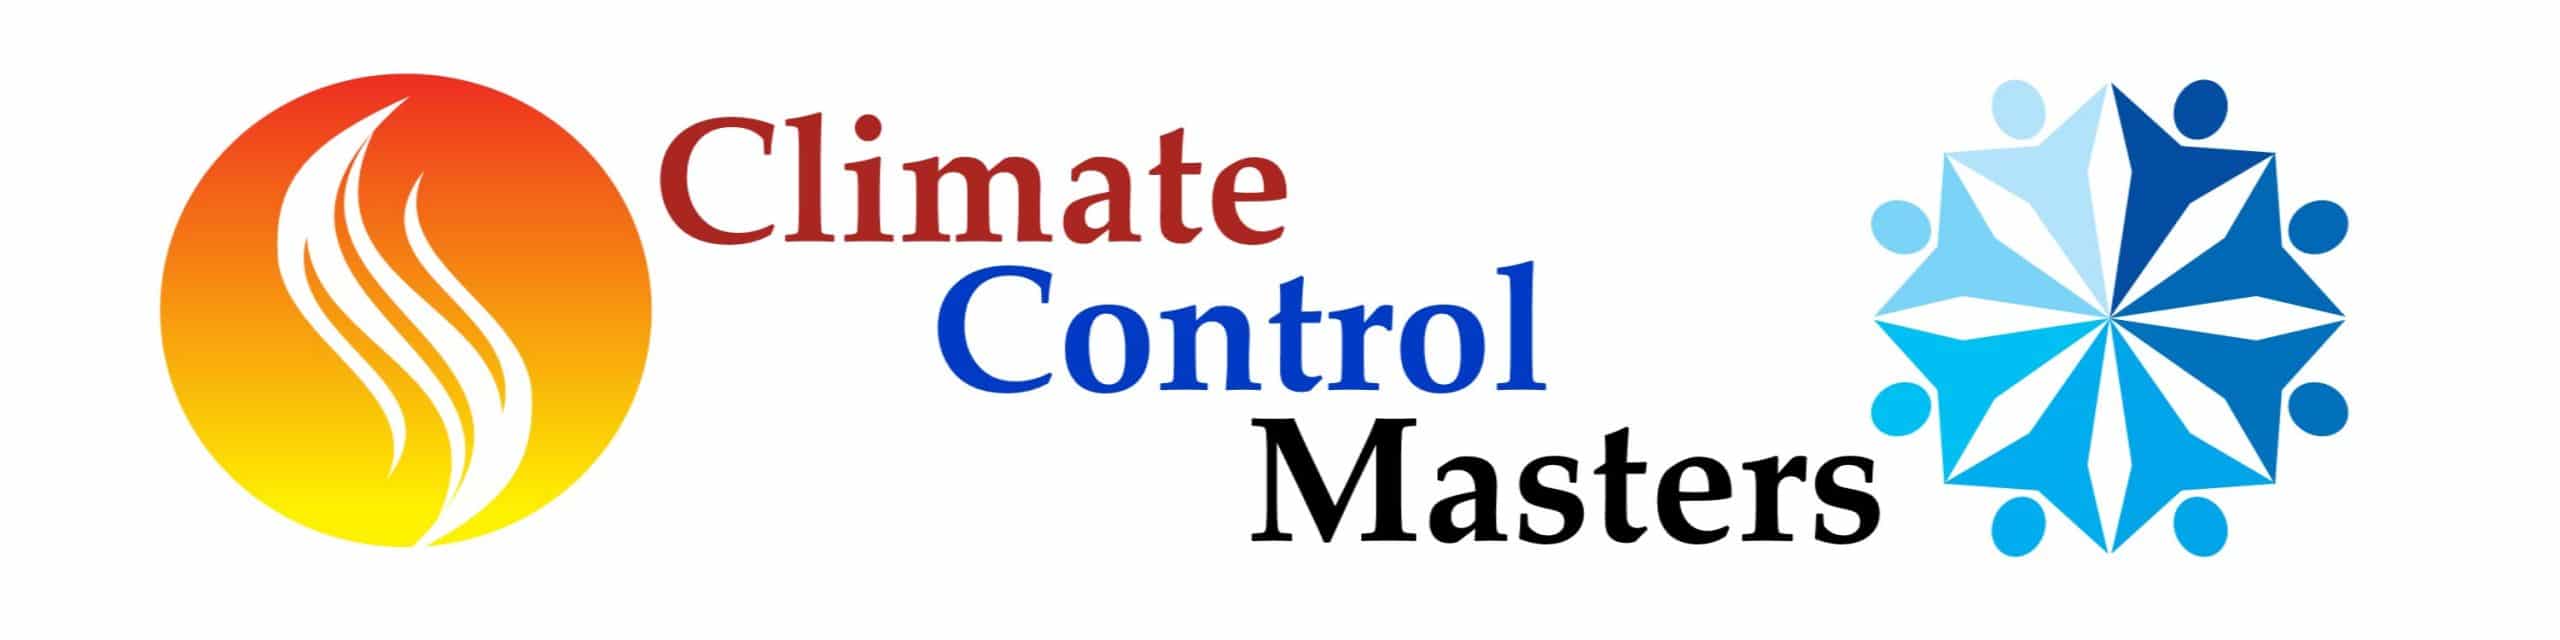 Climate Control Masters